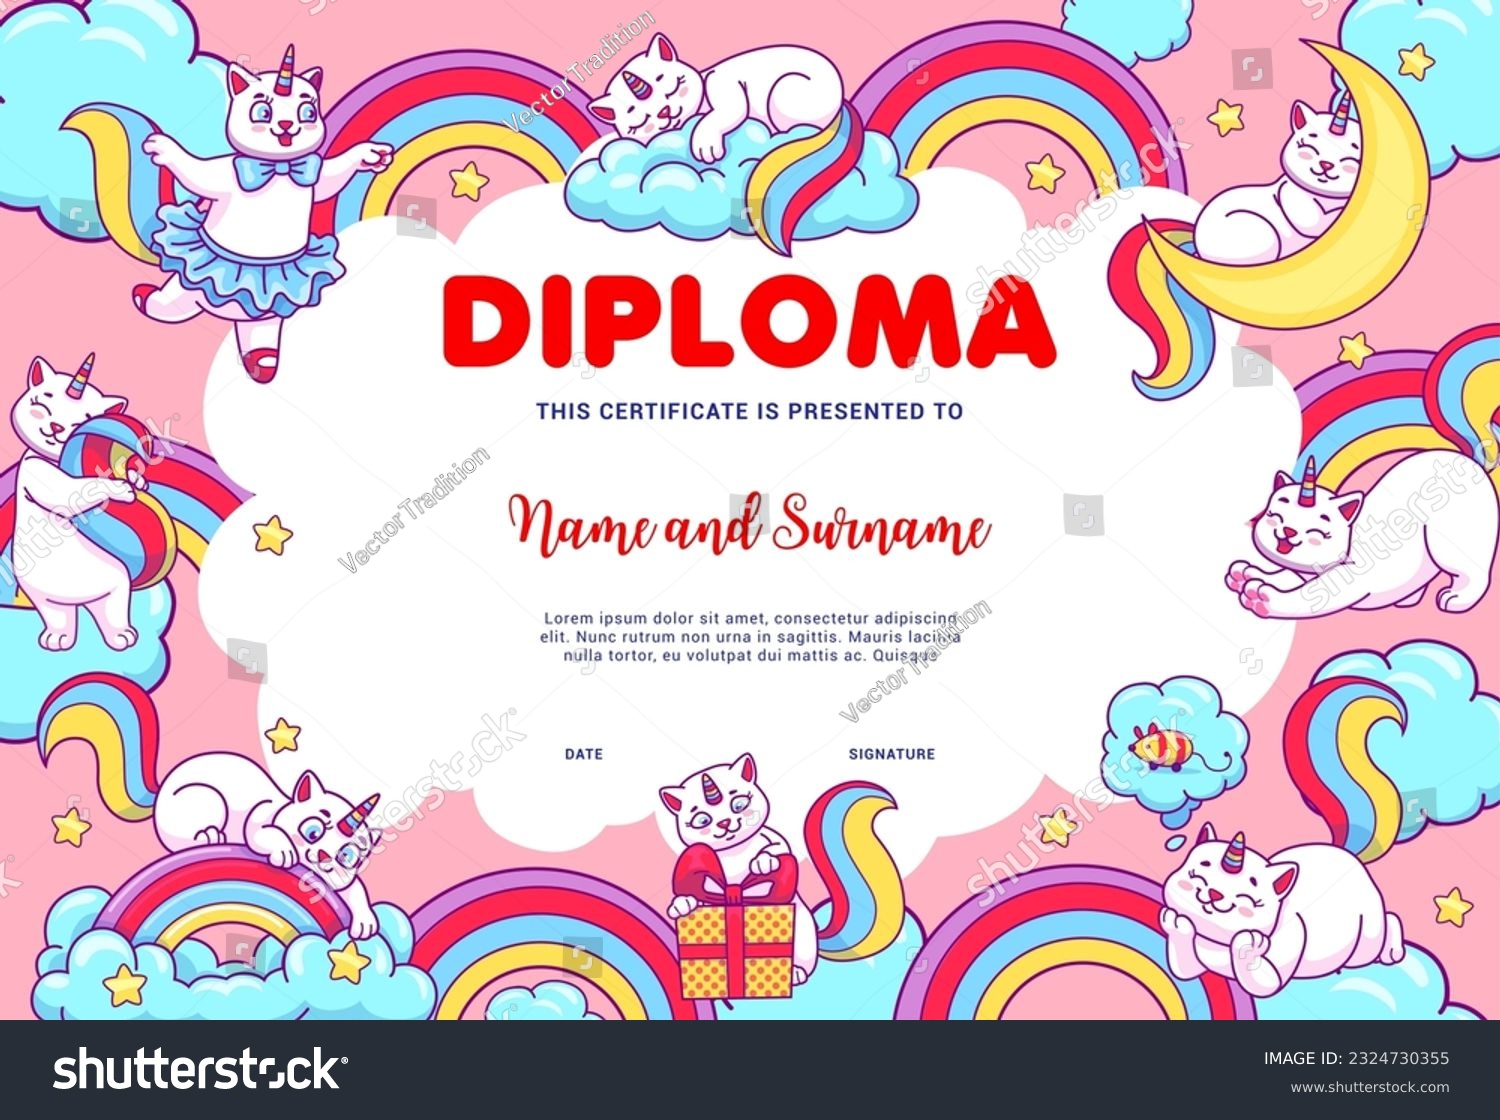 SVG of Kids diploma, cartoon caticorn cats on rainbow and clouds, vector education certificate. Cute cat unicorn or caticorn kitten characters playing on school or kindergarten workshop diploma background svg